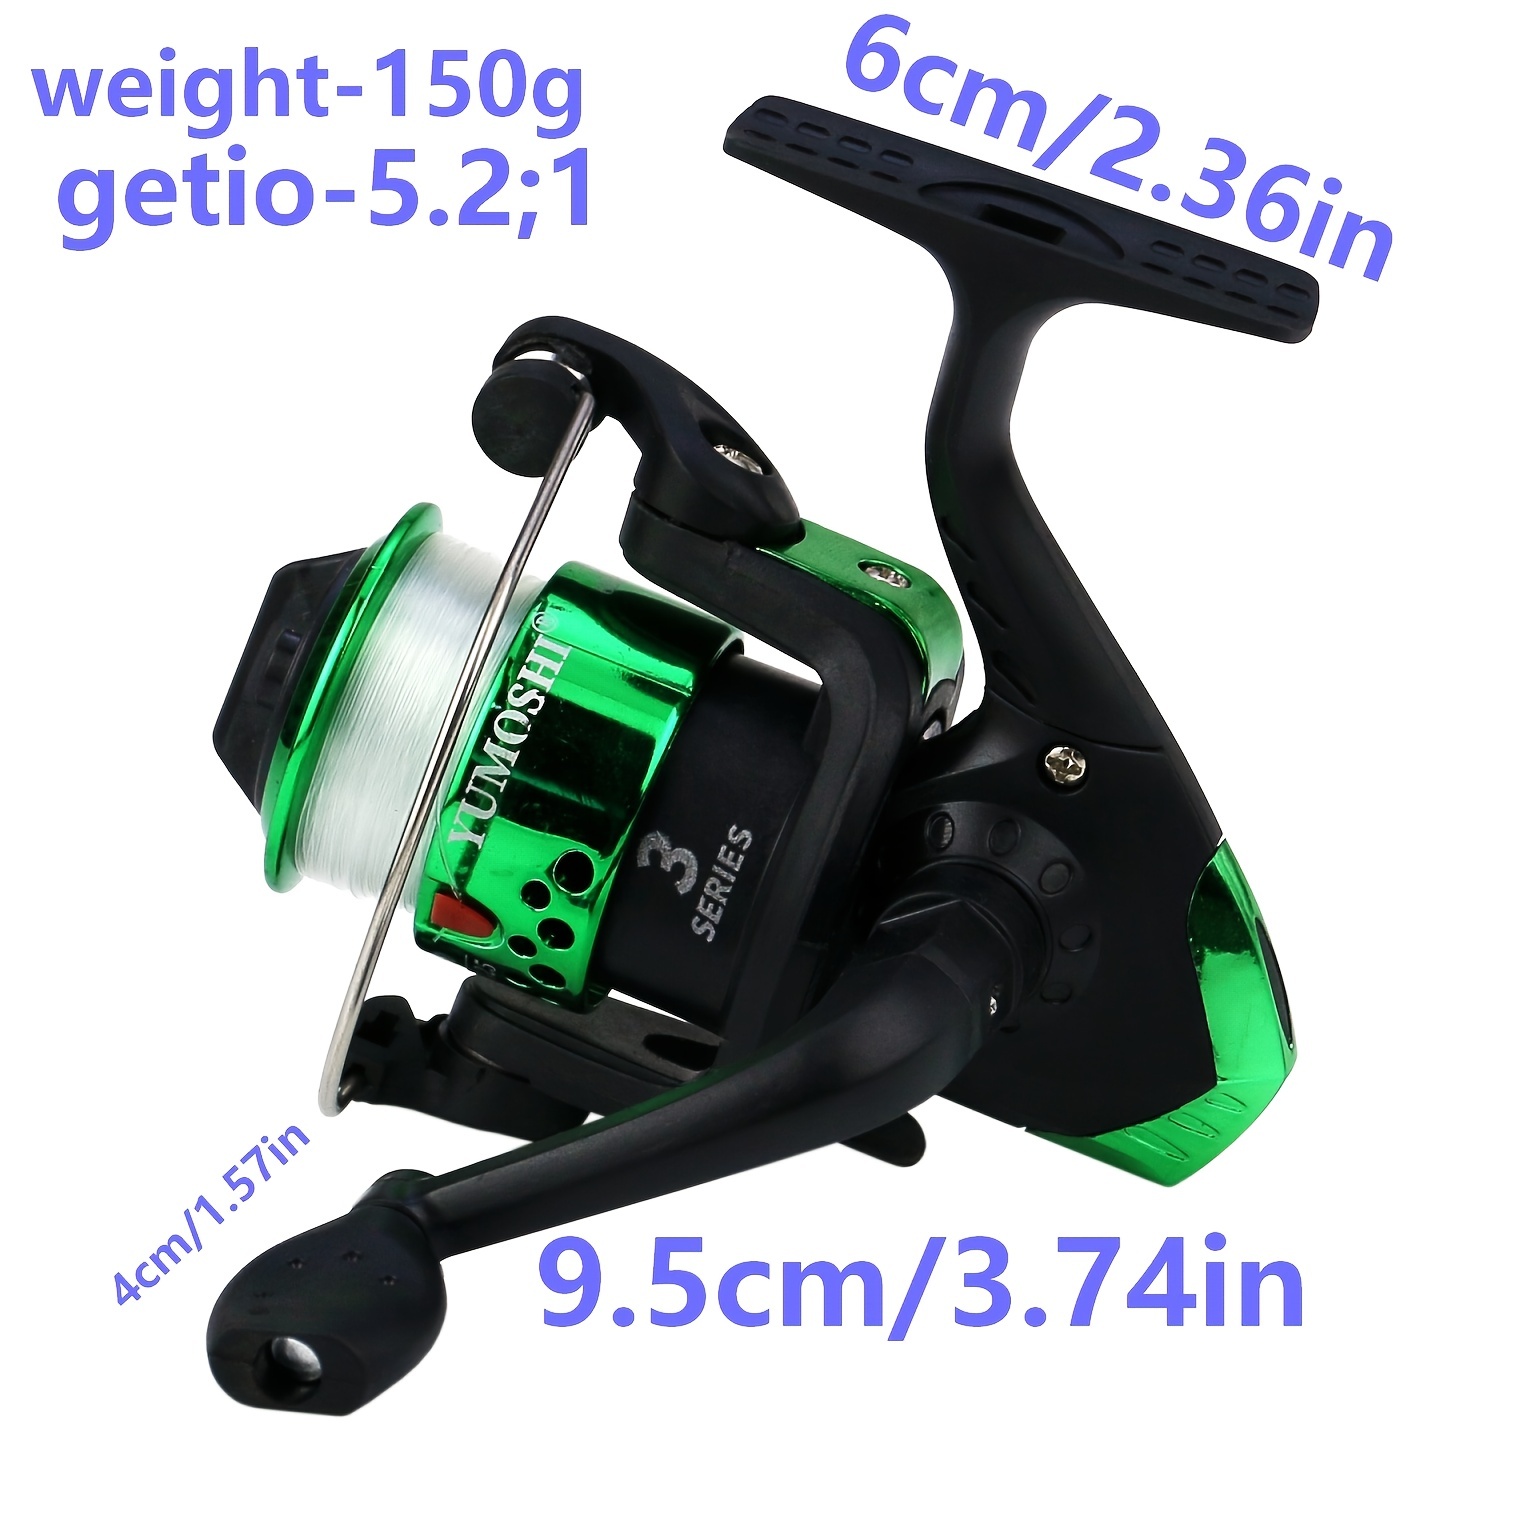 Ultralight Fishing Reel Gear Ratio 5.2:1 Spinning Reel With 60m